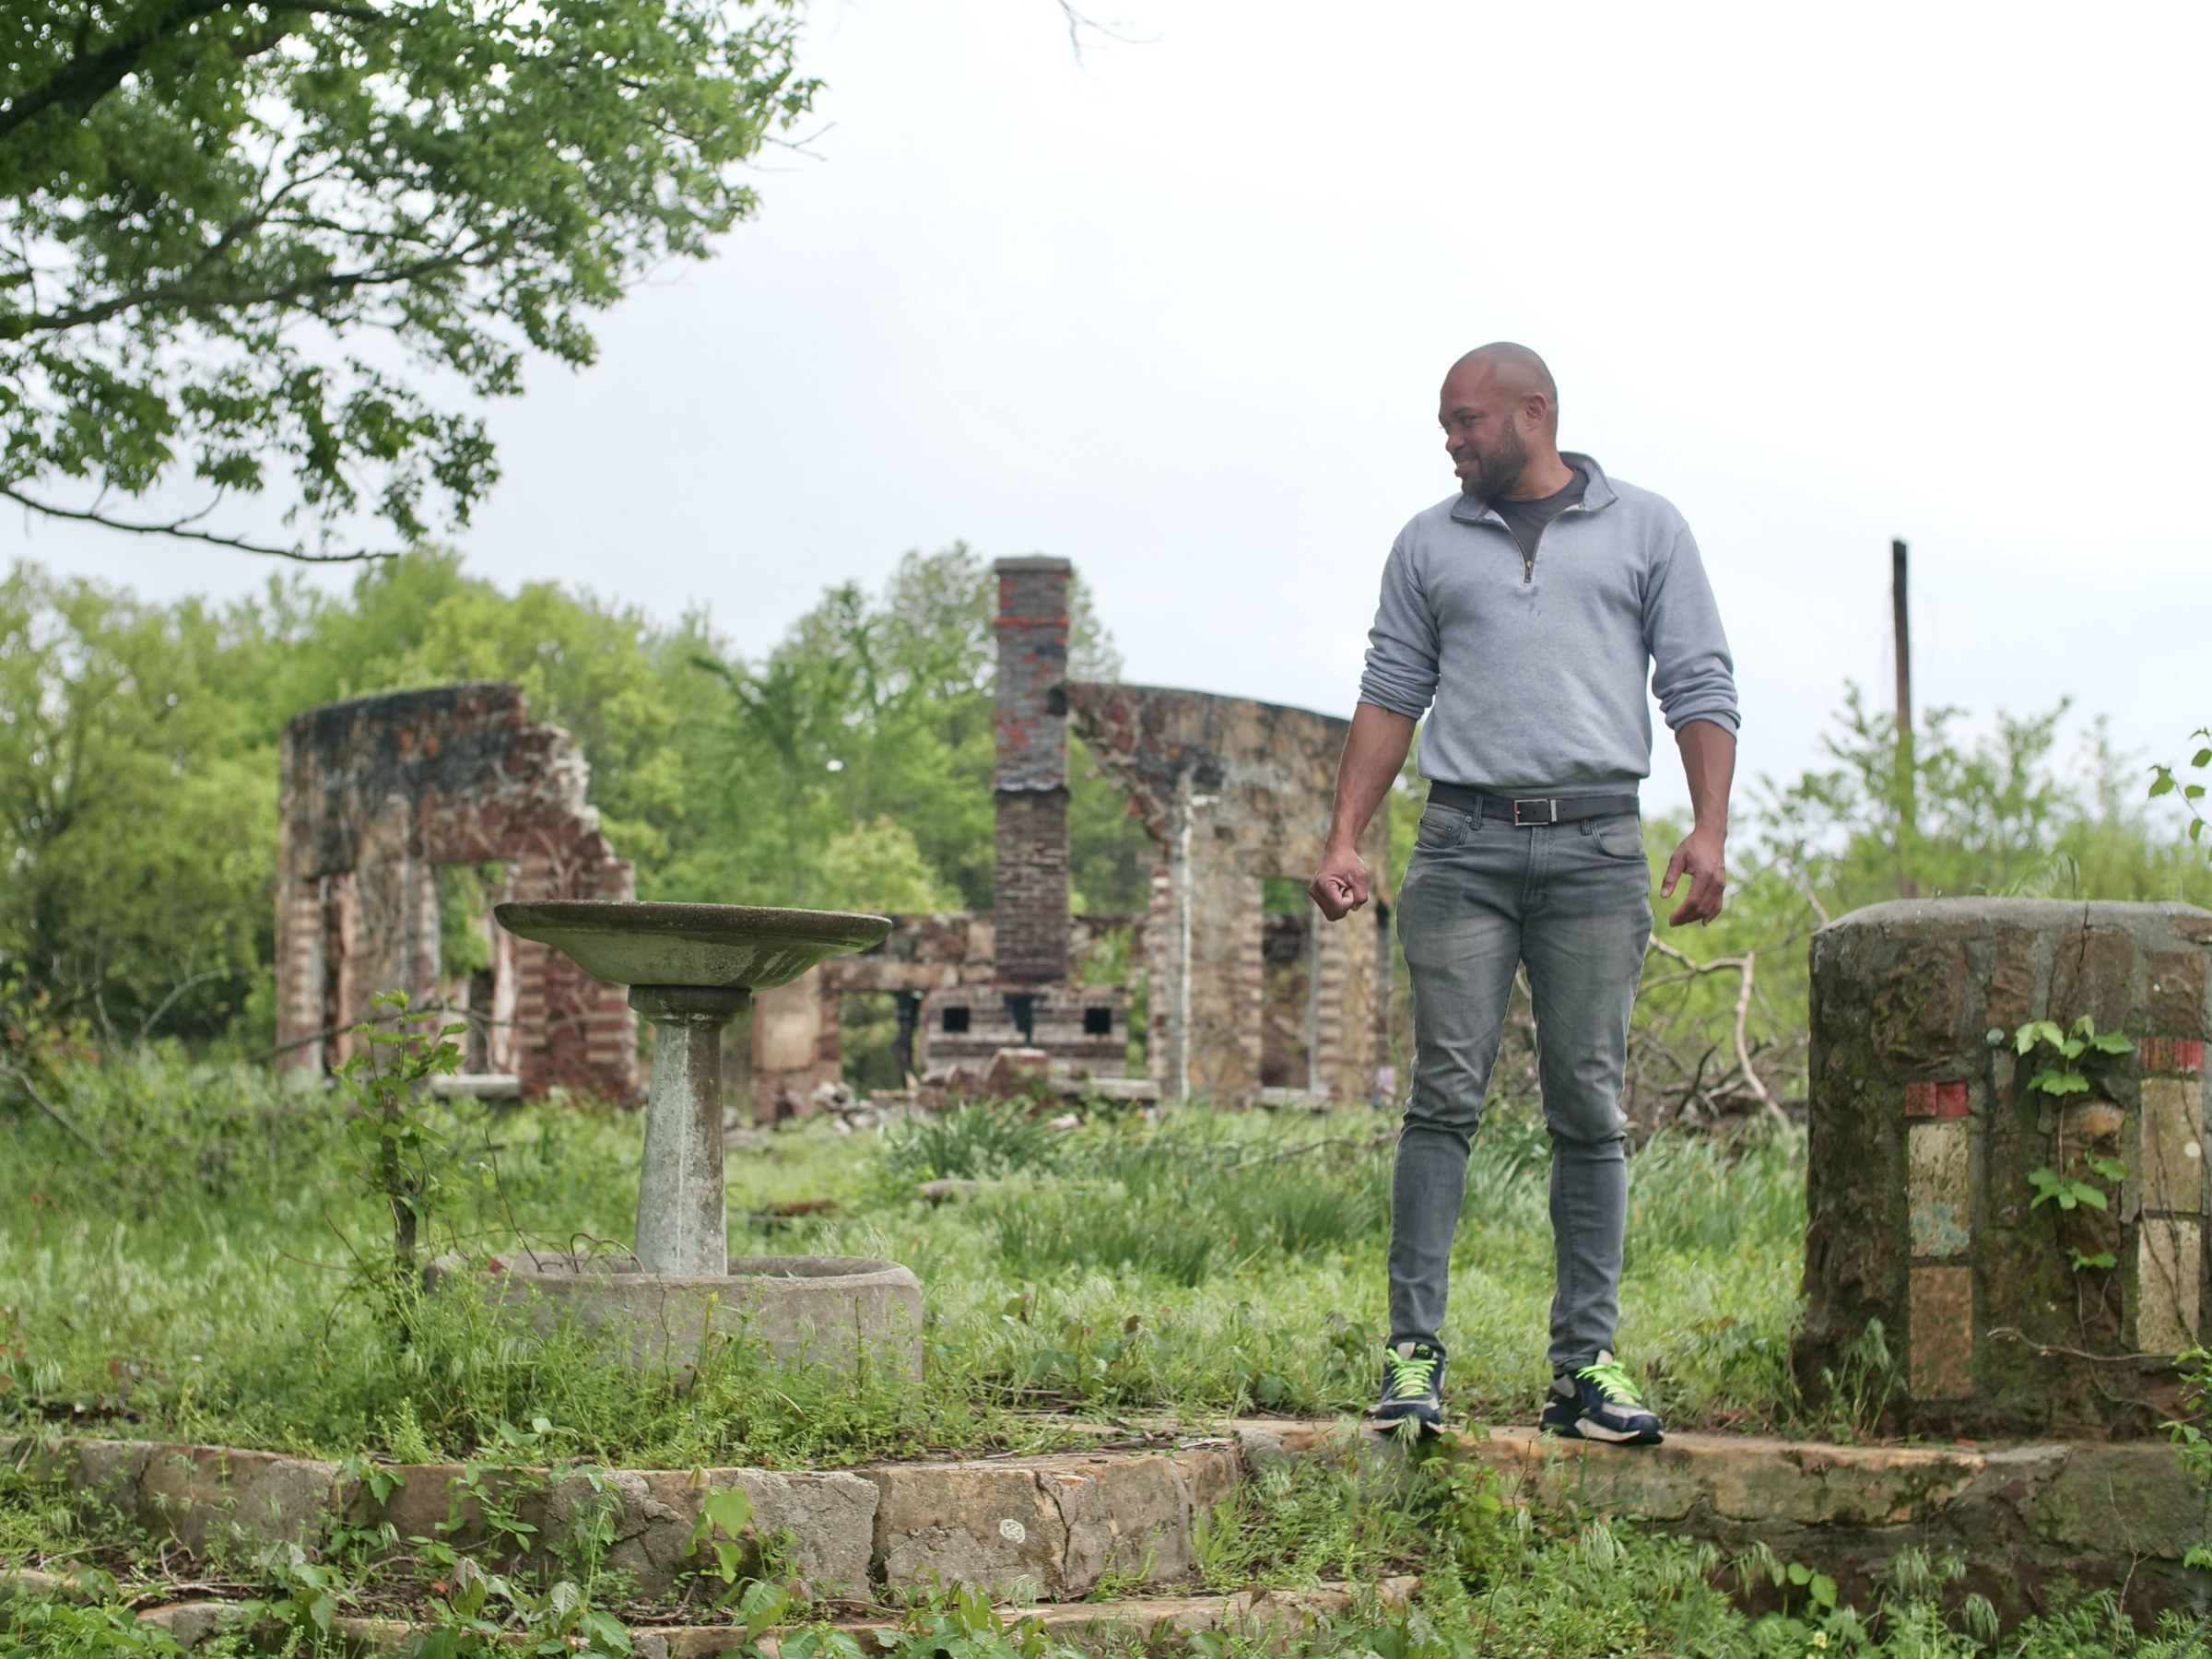 A man stands among ruins of a building or outdoor space with vegetation taking over much of the area and a small fountain to the right of him.